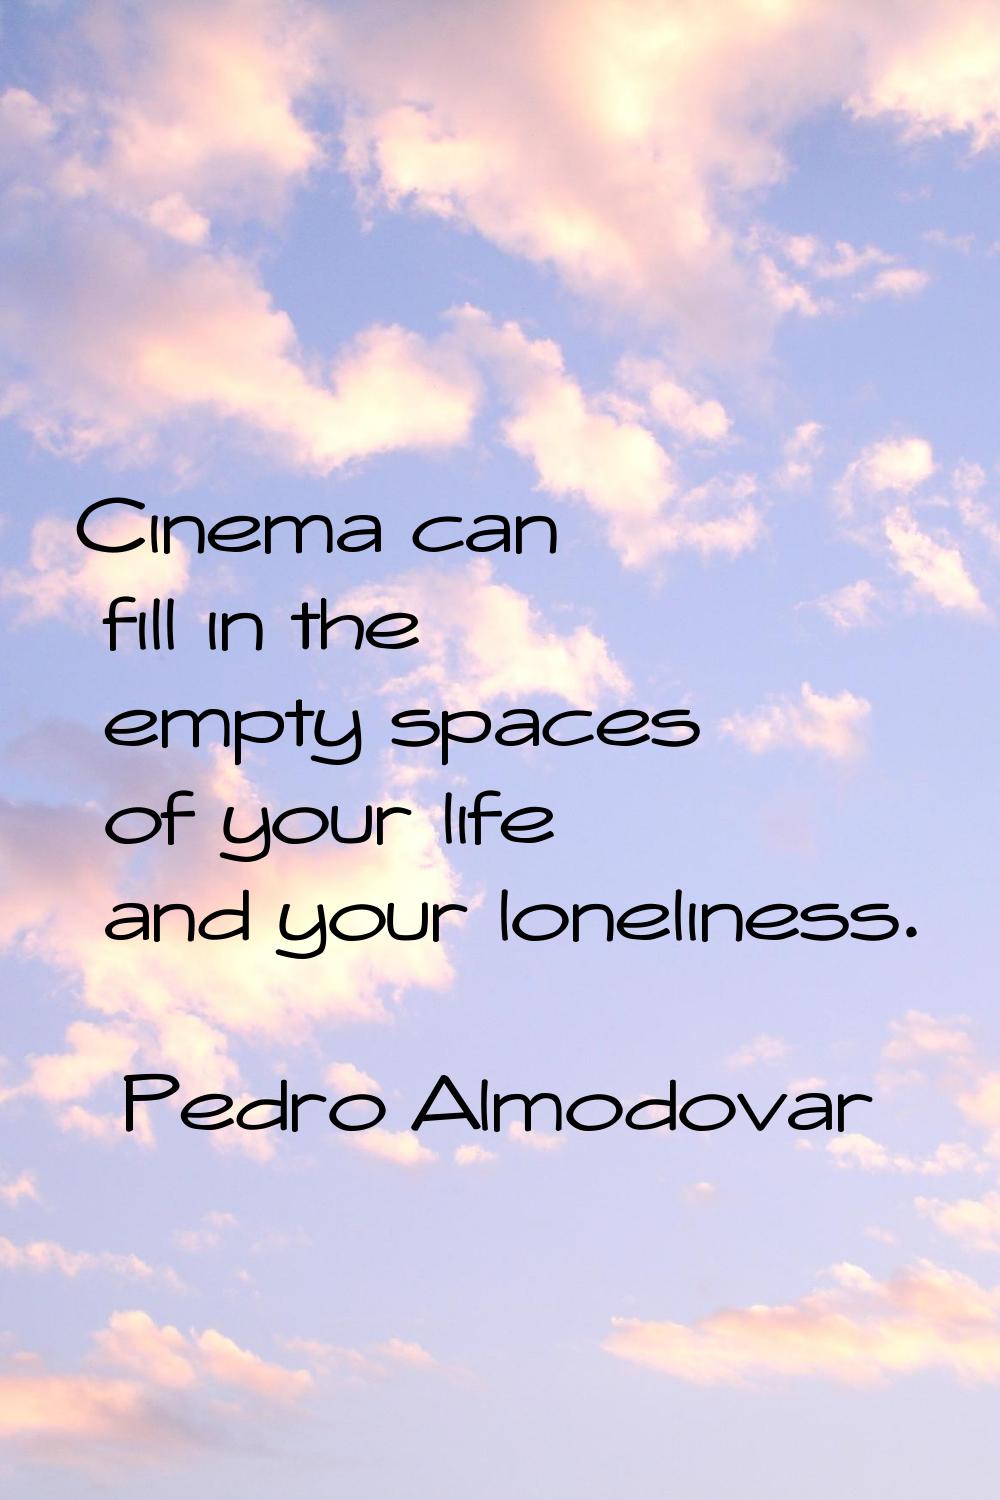 Cinema can fill in the empty spaces of your life and your loneliness.